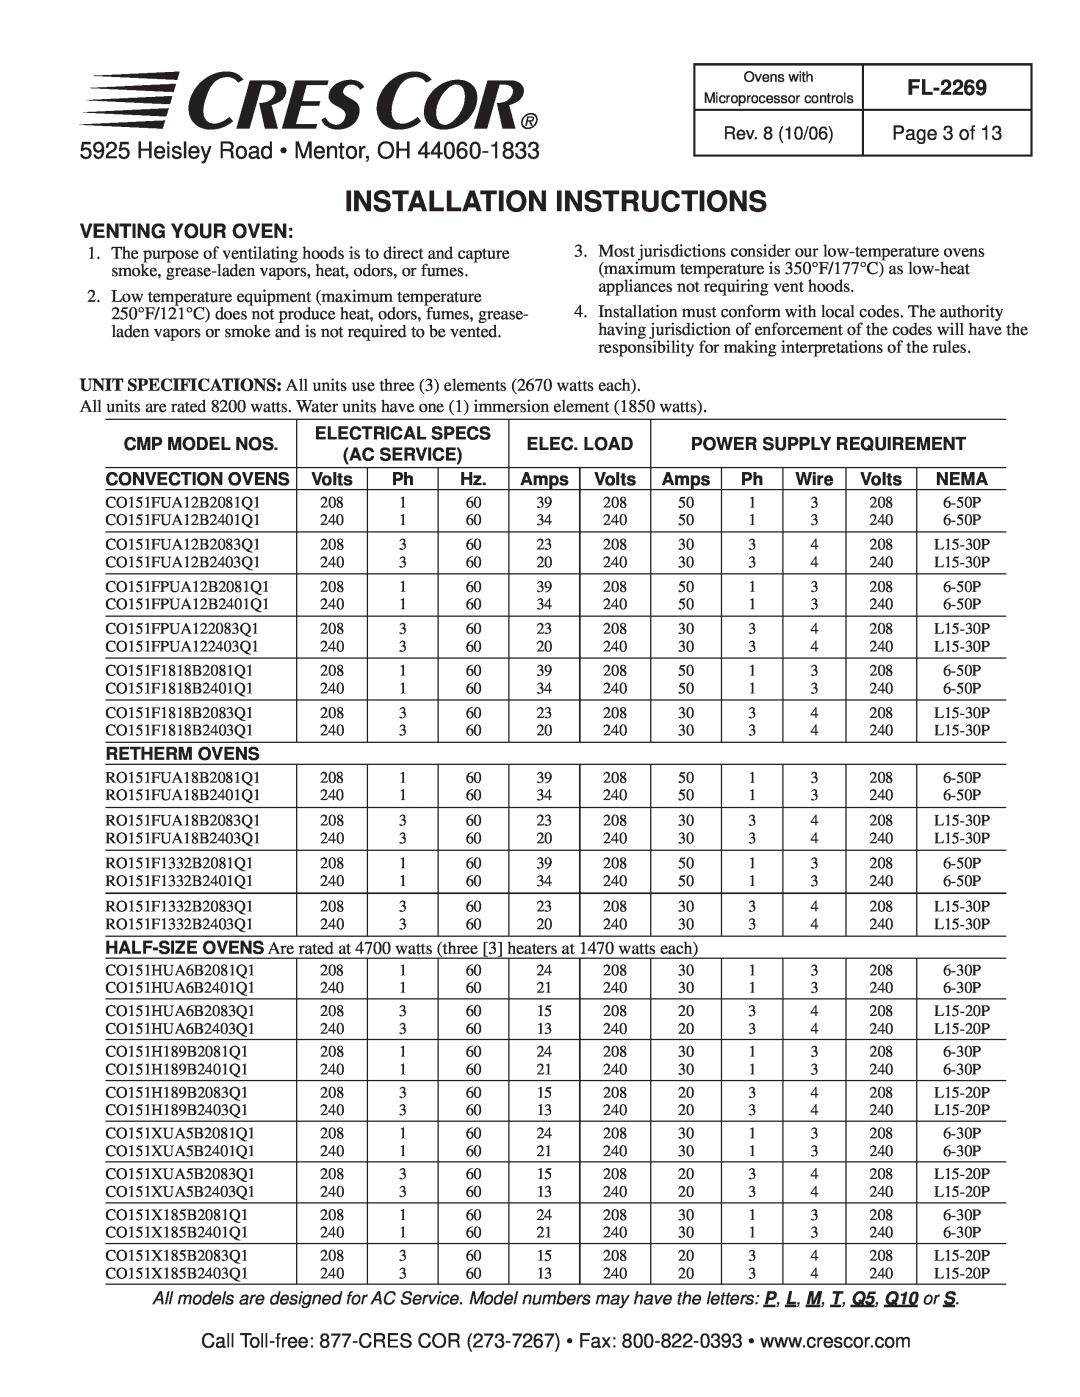 Cres Cor CO151H189B-Q1 Installation Instructions, Page 3 of, Venting Your Oven, Heisley Road Mentor, OH, FL-2269, Volts 